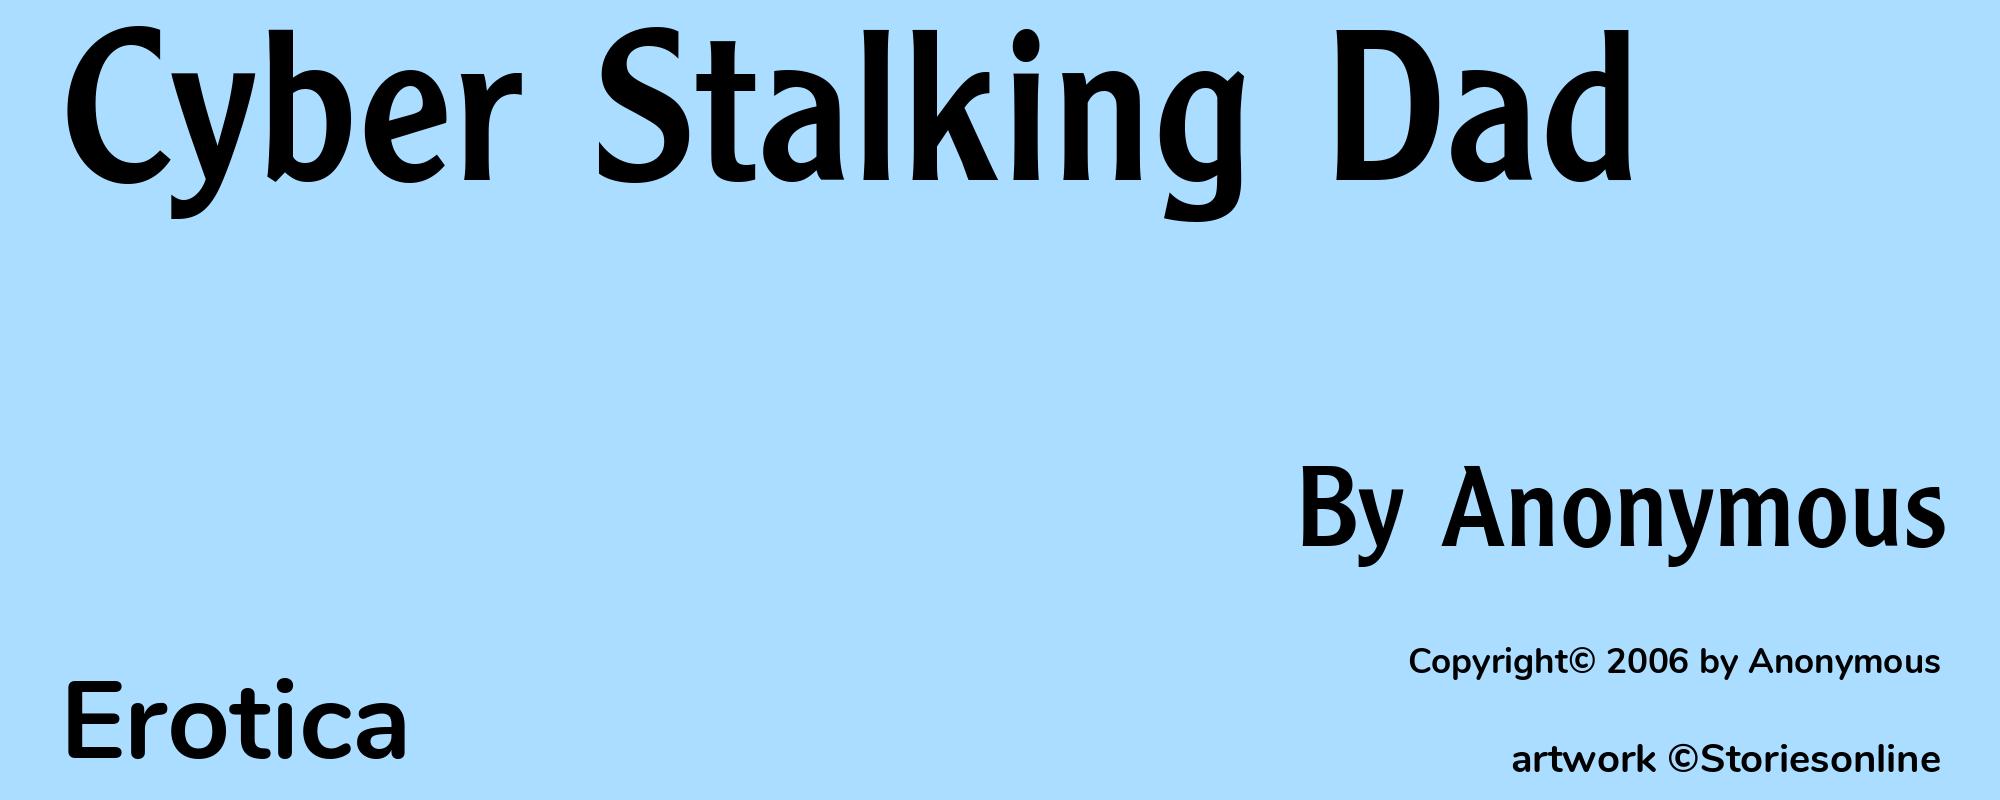 Cyber Stalking Dad - Cover